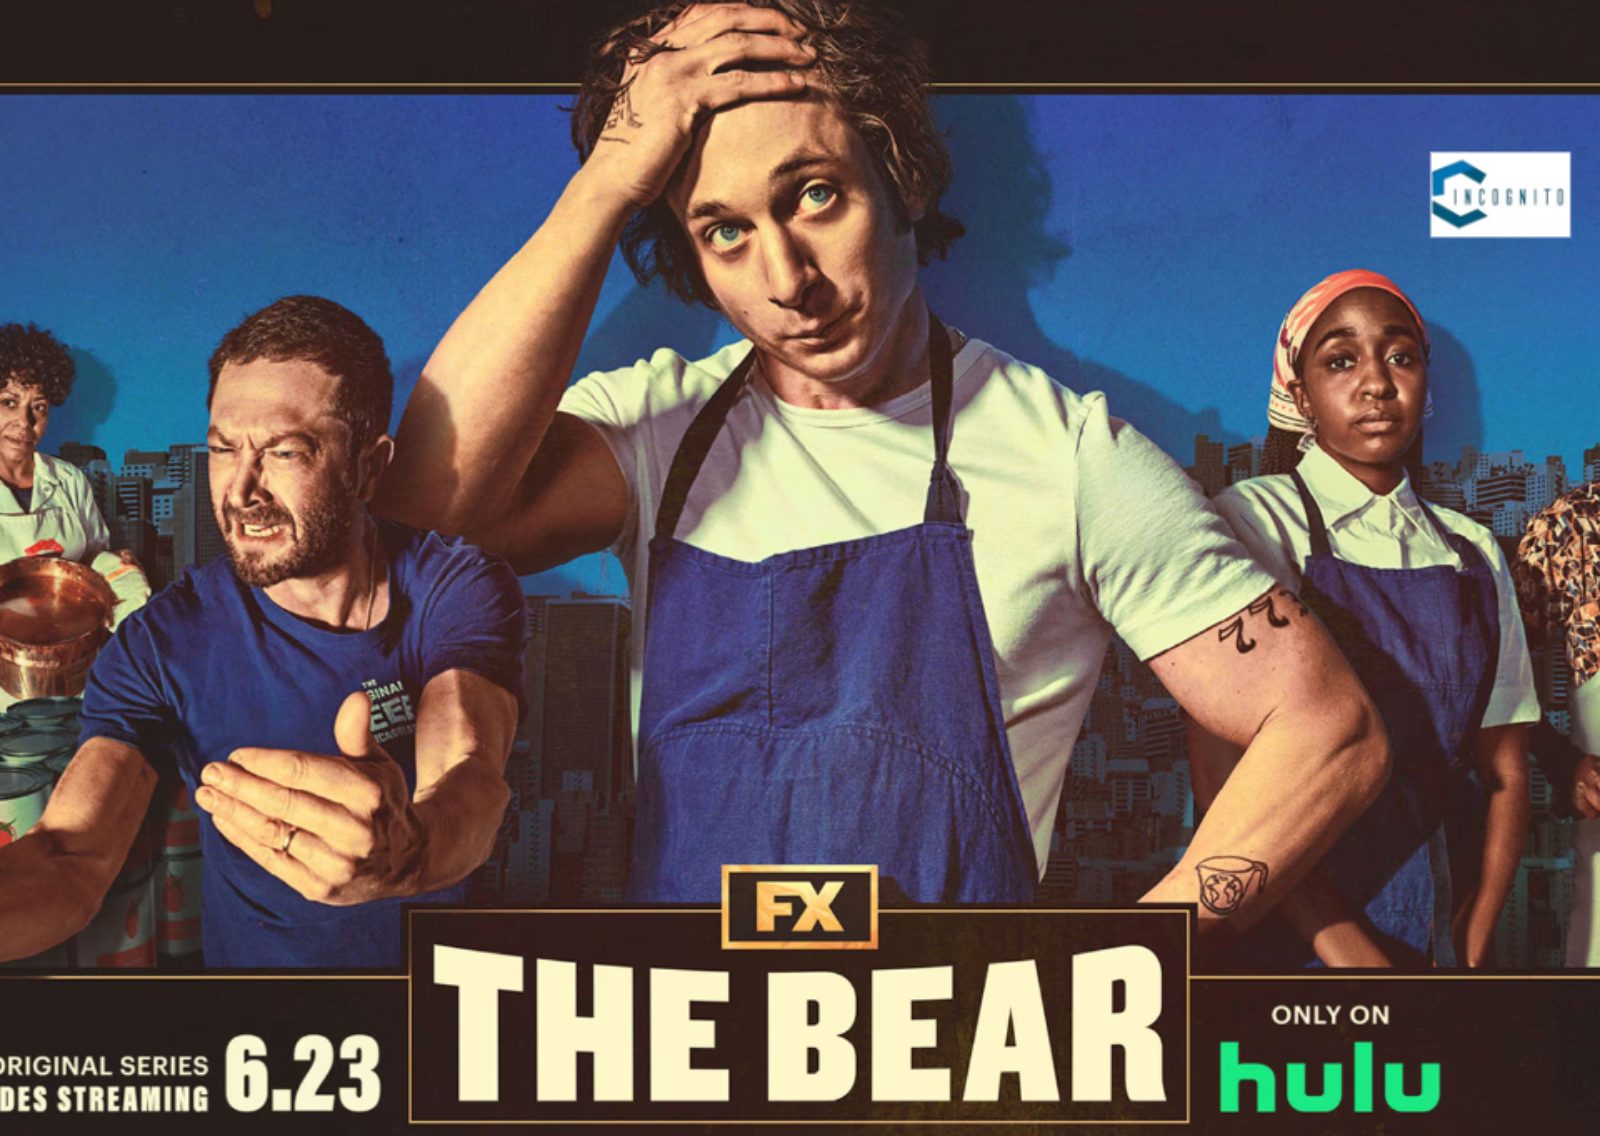 Cast of The Bear: Understand The Character Arcs 